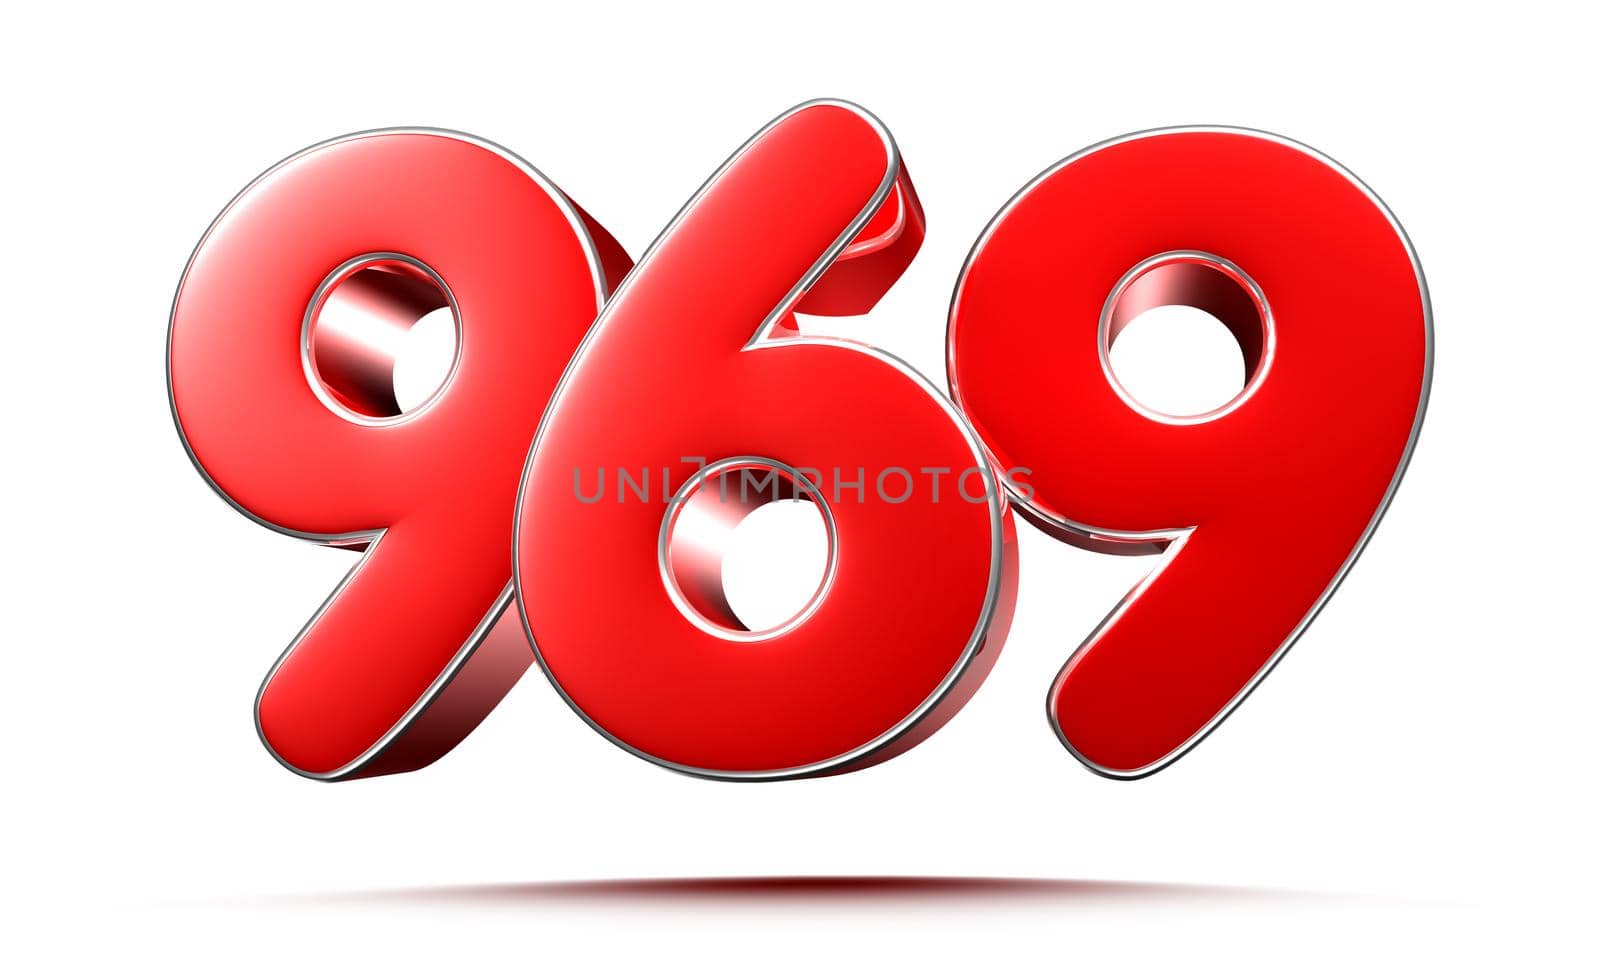 Rounded red numbers 969 on white background 3D illustration with clipping path by thitimontoyai